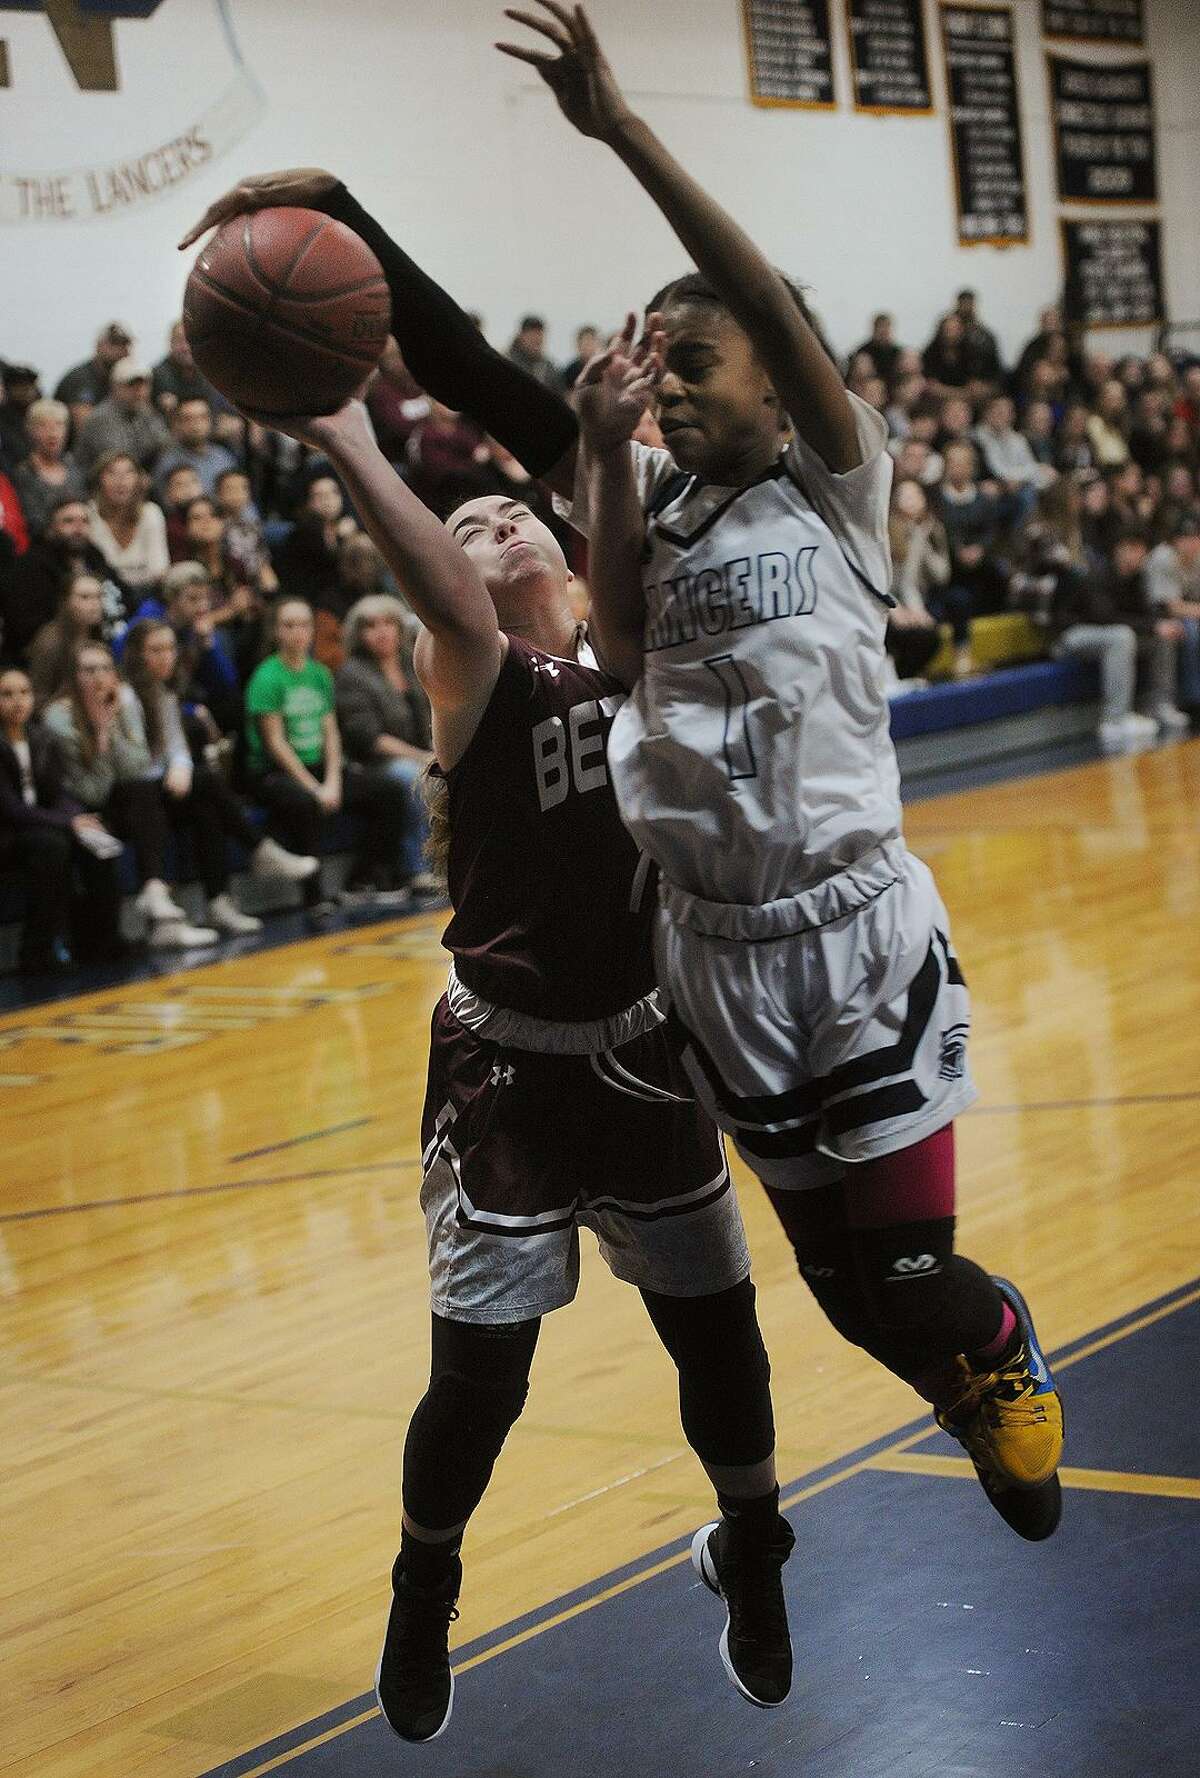 Bethel’s Mia Prazeres is fouled by Notre Dame of Fairfield’s Yamani McCollough in the first half of their SWC semifinal game at Notre Dame High School in Fairfield on Monday. ND-Fairfield won 46-40.